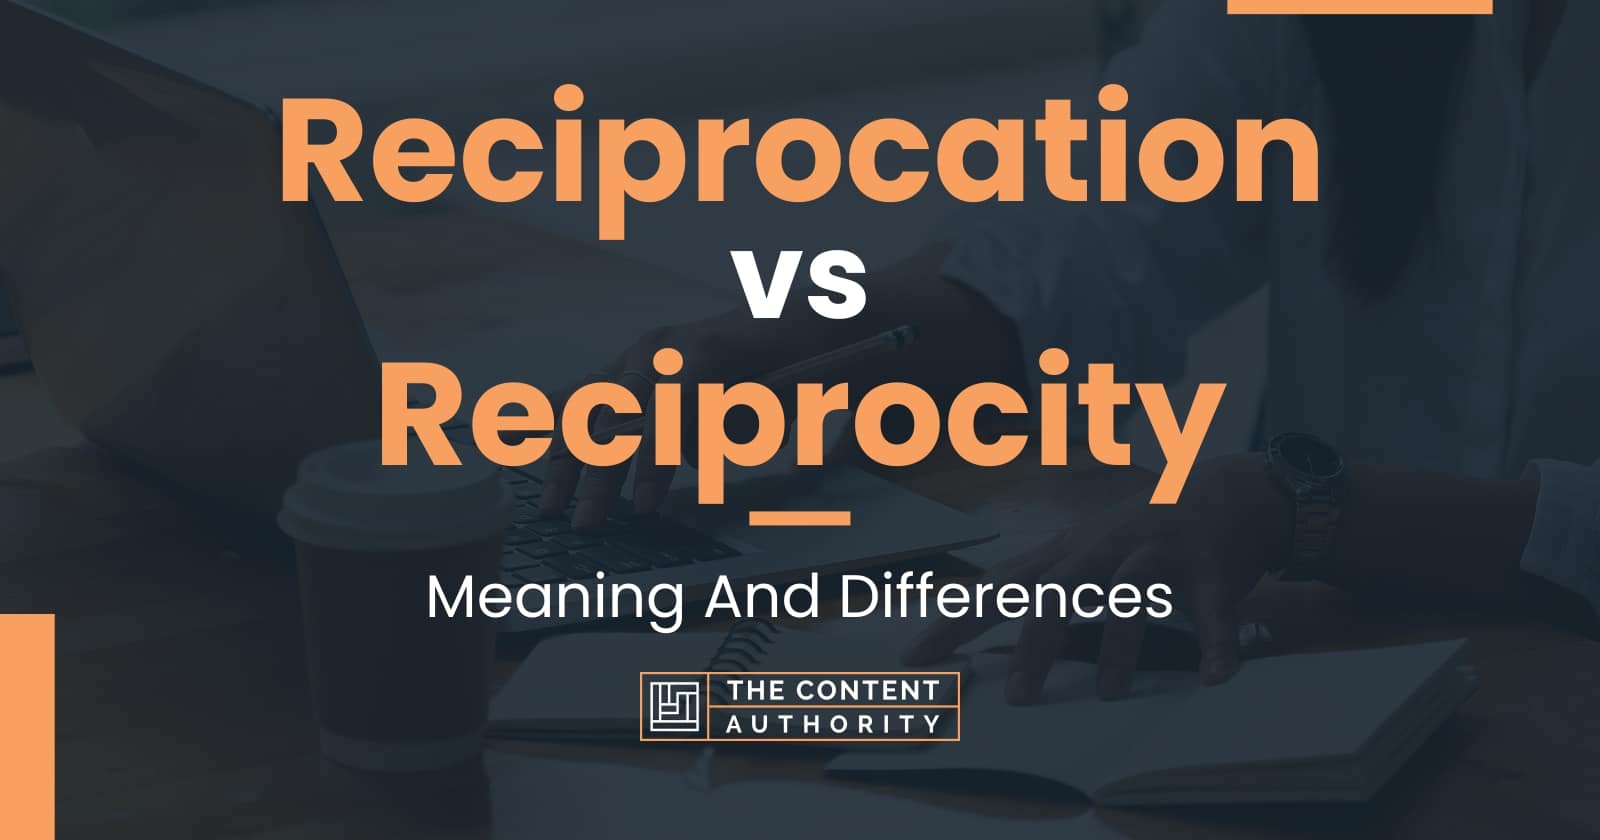 Reciprocation vs Reciprocity: Meaning And Differences